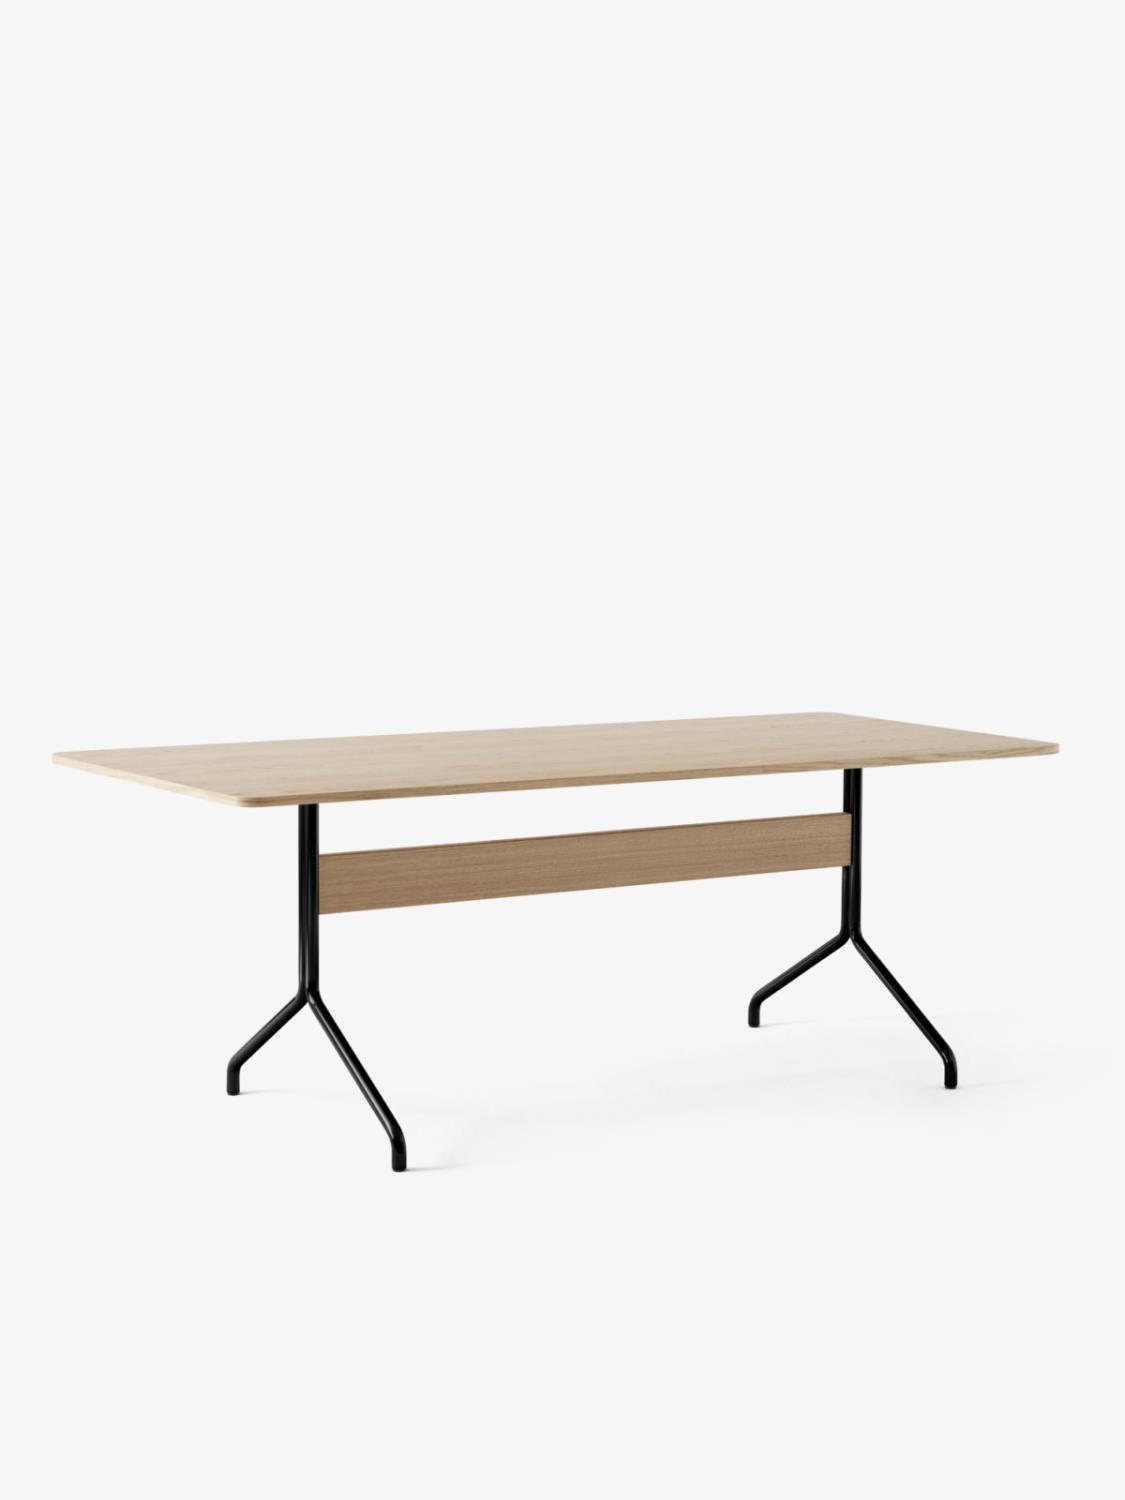 &Tradition - Pavilion Dining Table AV19 - Clear Laquered Oak and Black Frame - 200x90 cm